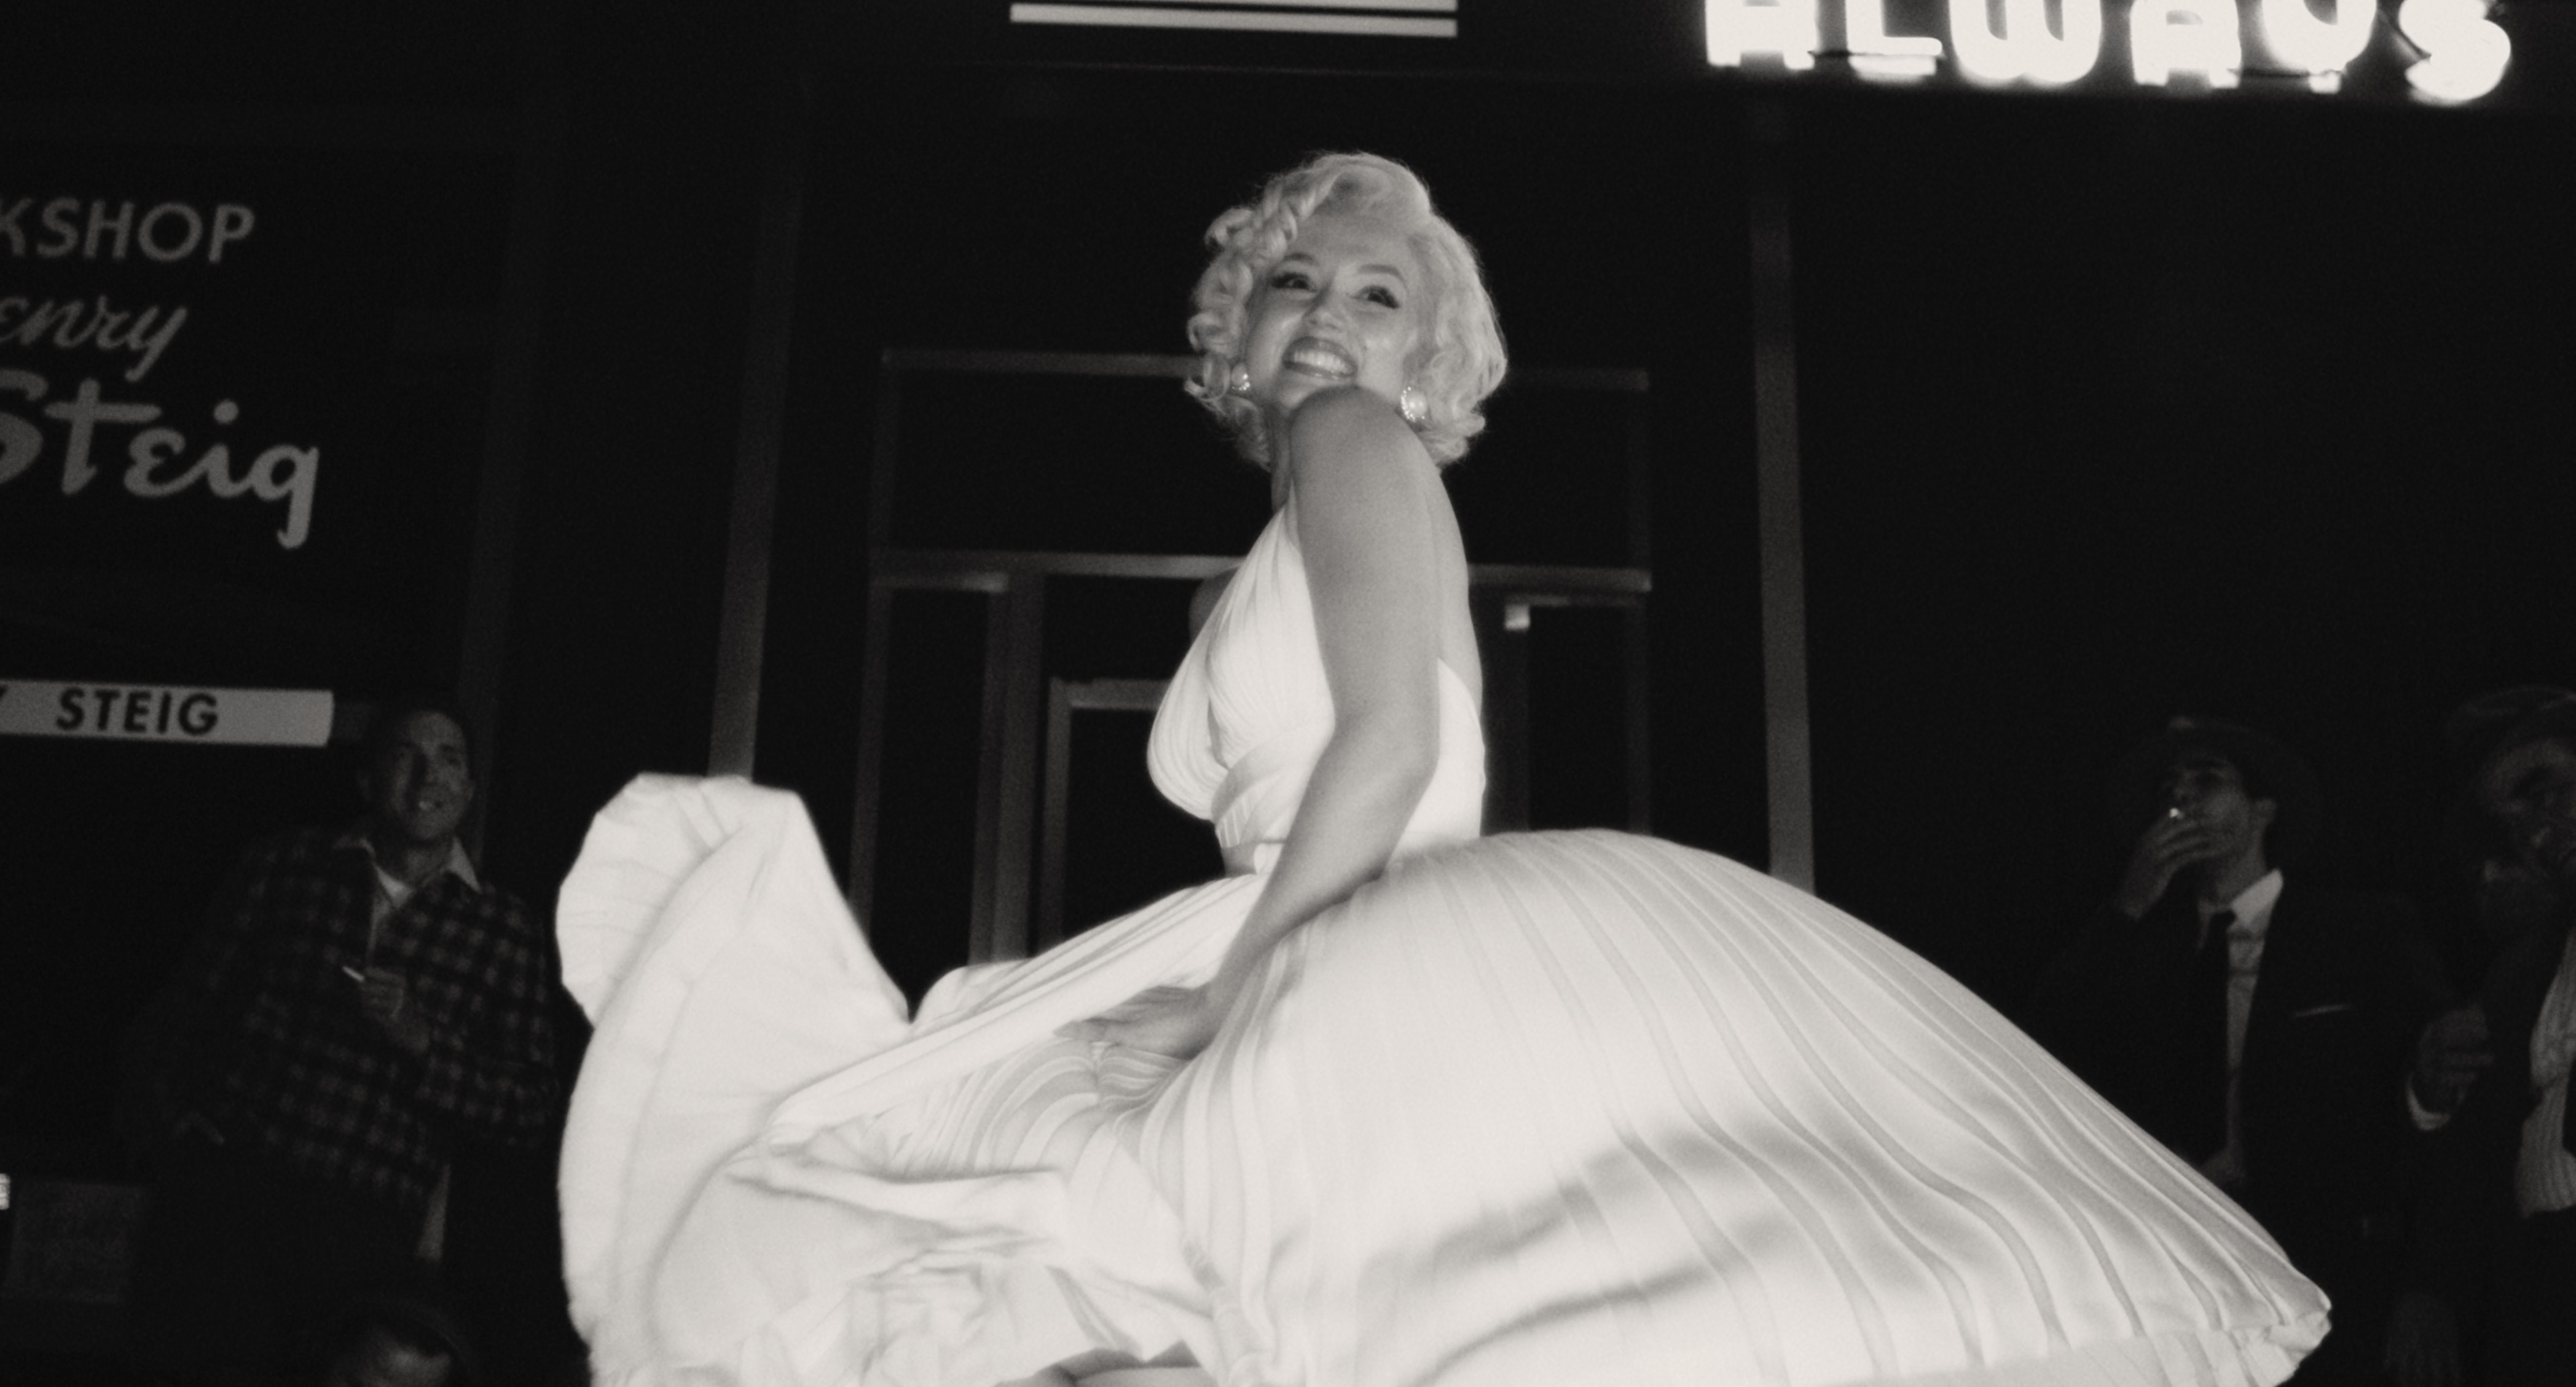 Why is fashion the truest thing about Marilyn Monroe in blonde?